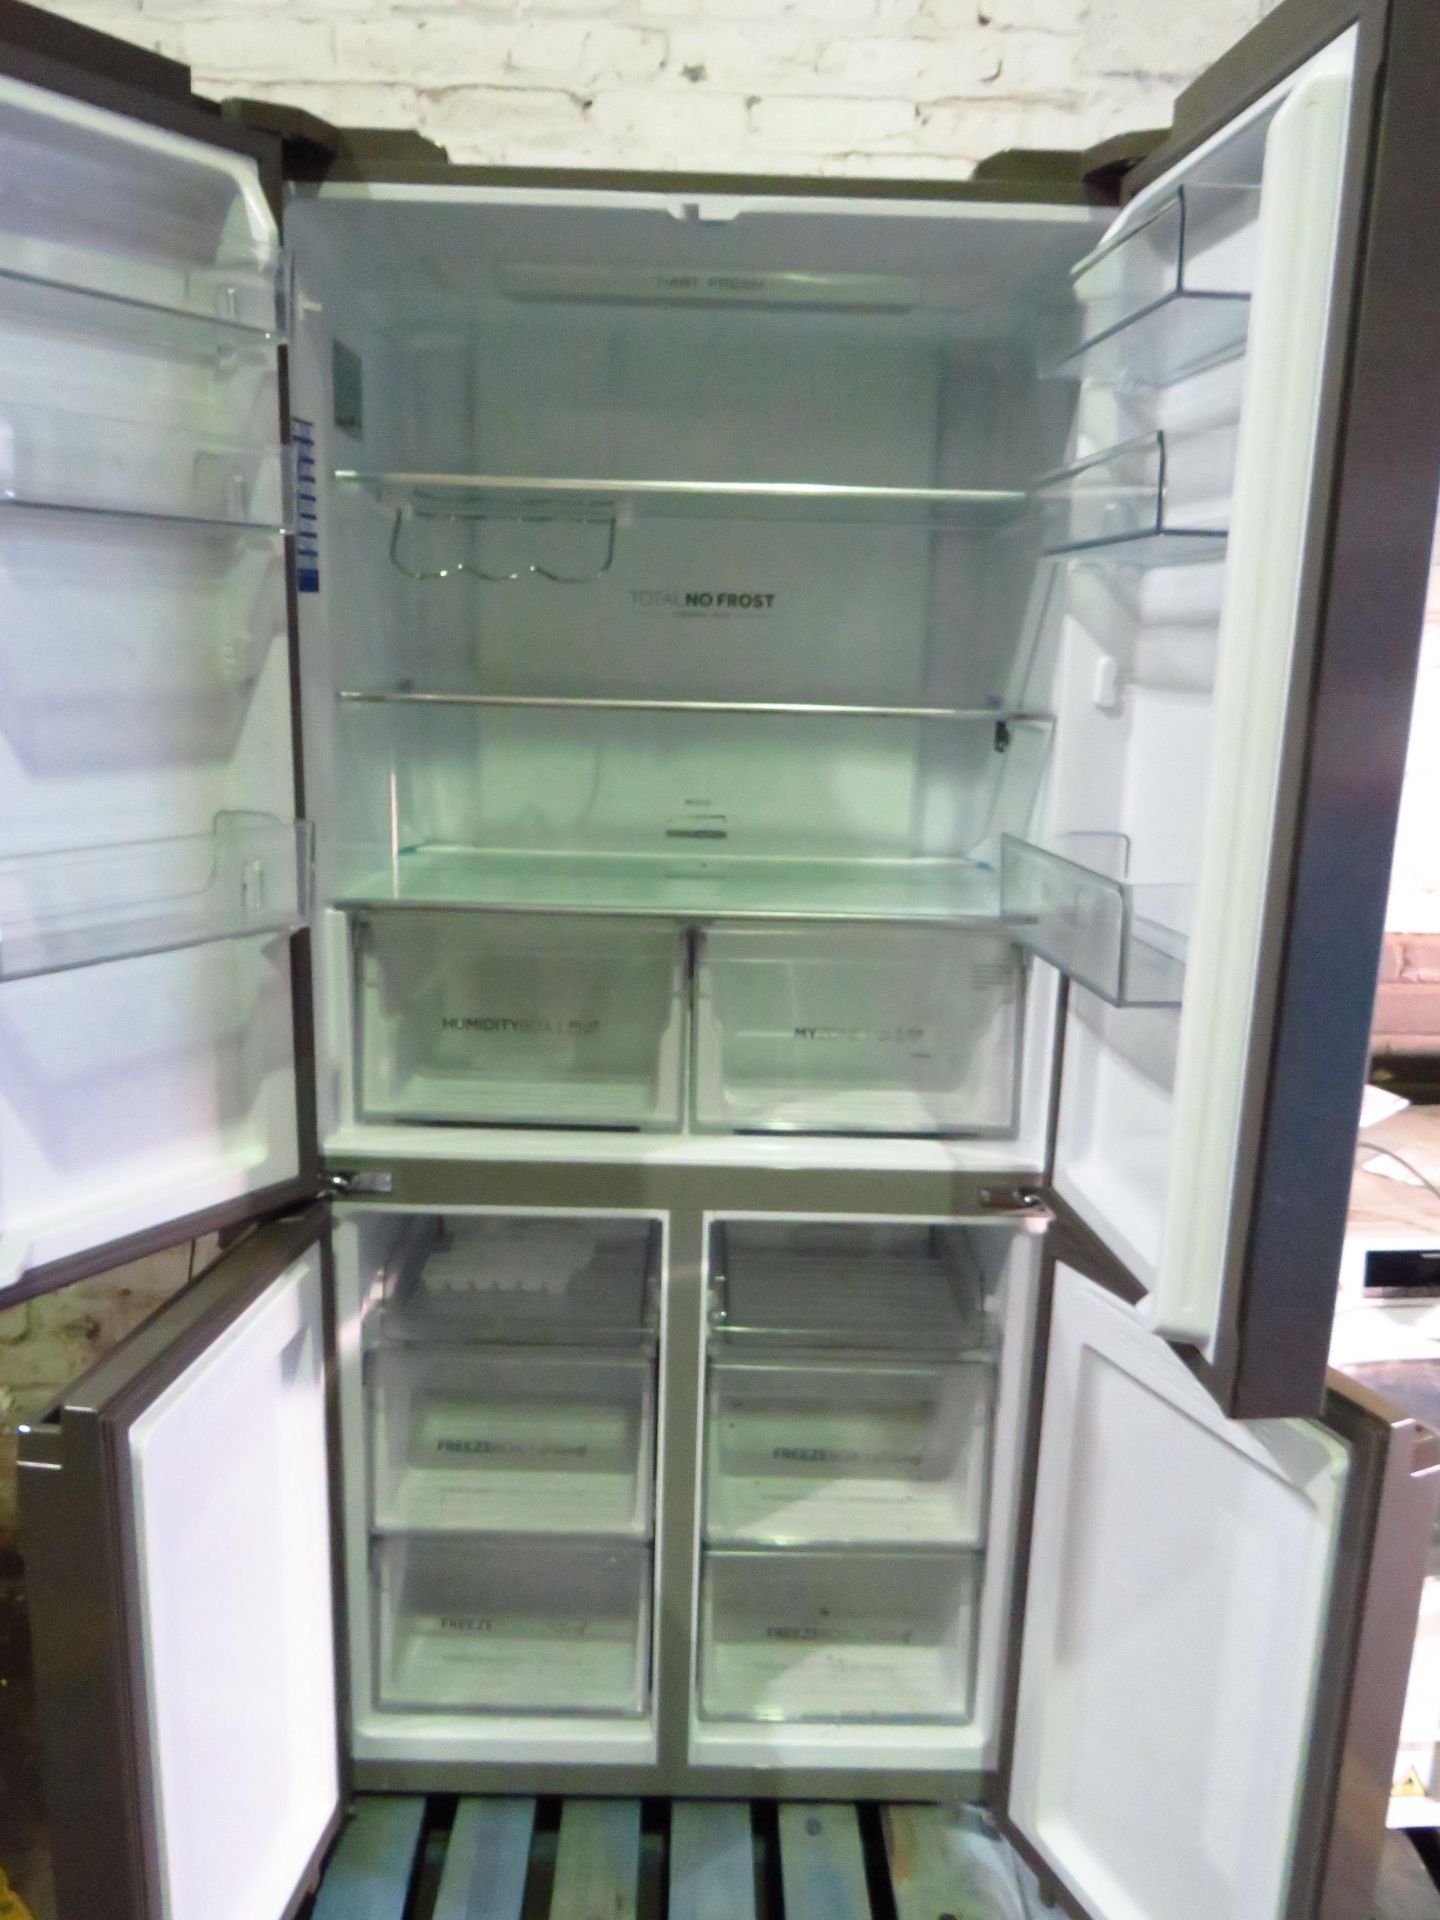 Haier 4 door american style fridge freezer, tested and working for coldness, has a small dent on the - Image 2 of 2